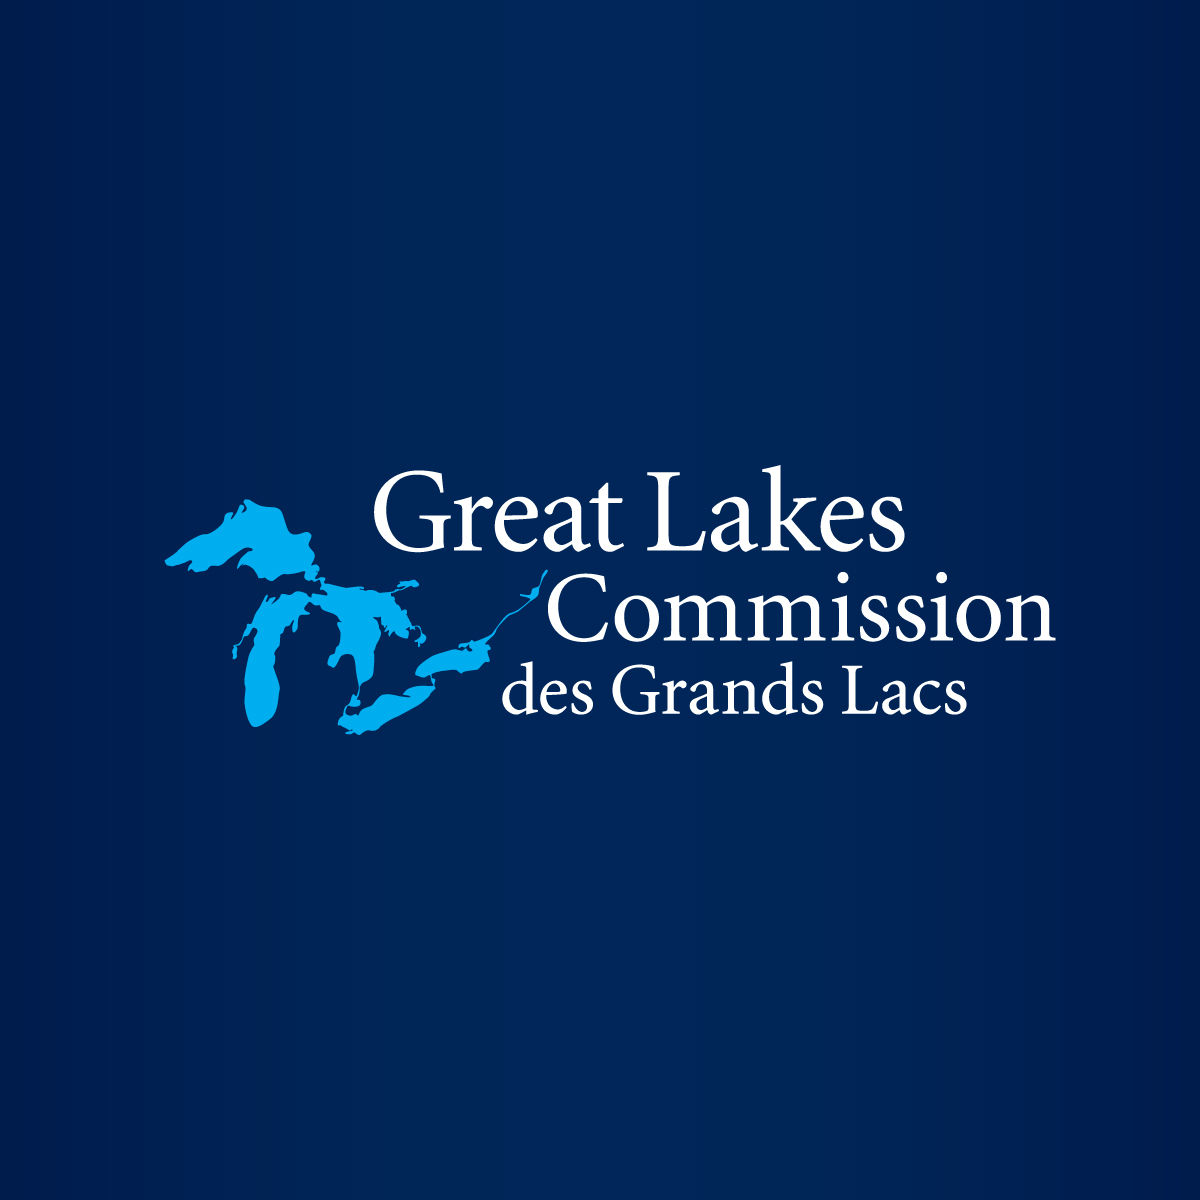 great lakes restoration initiative grant awarded to sanitary district of michigan city